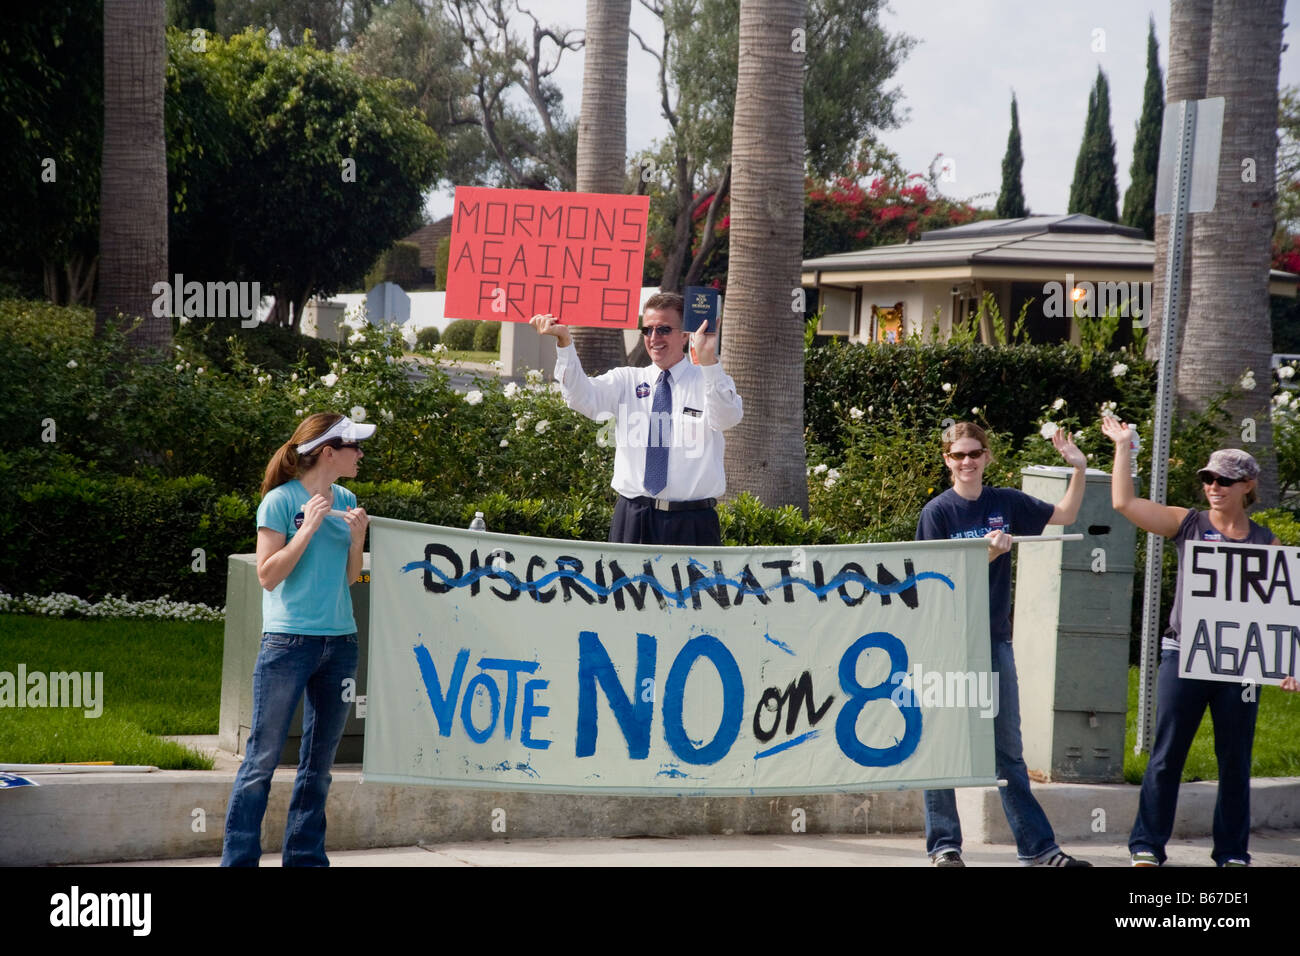 Demonstrators protest against state ballot proposition at Pacific Coast Highway in Laguna Niguel, CA, USA Stock Photo